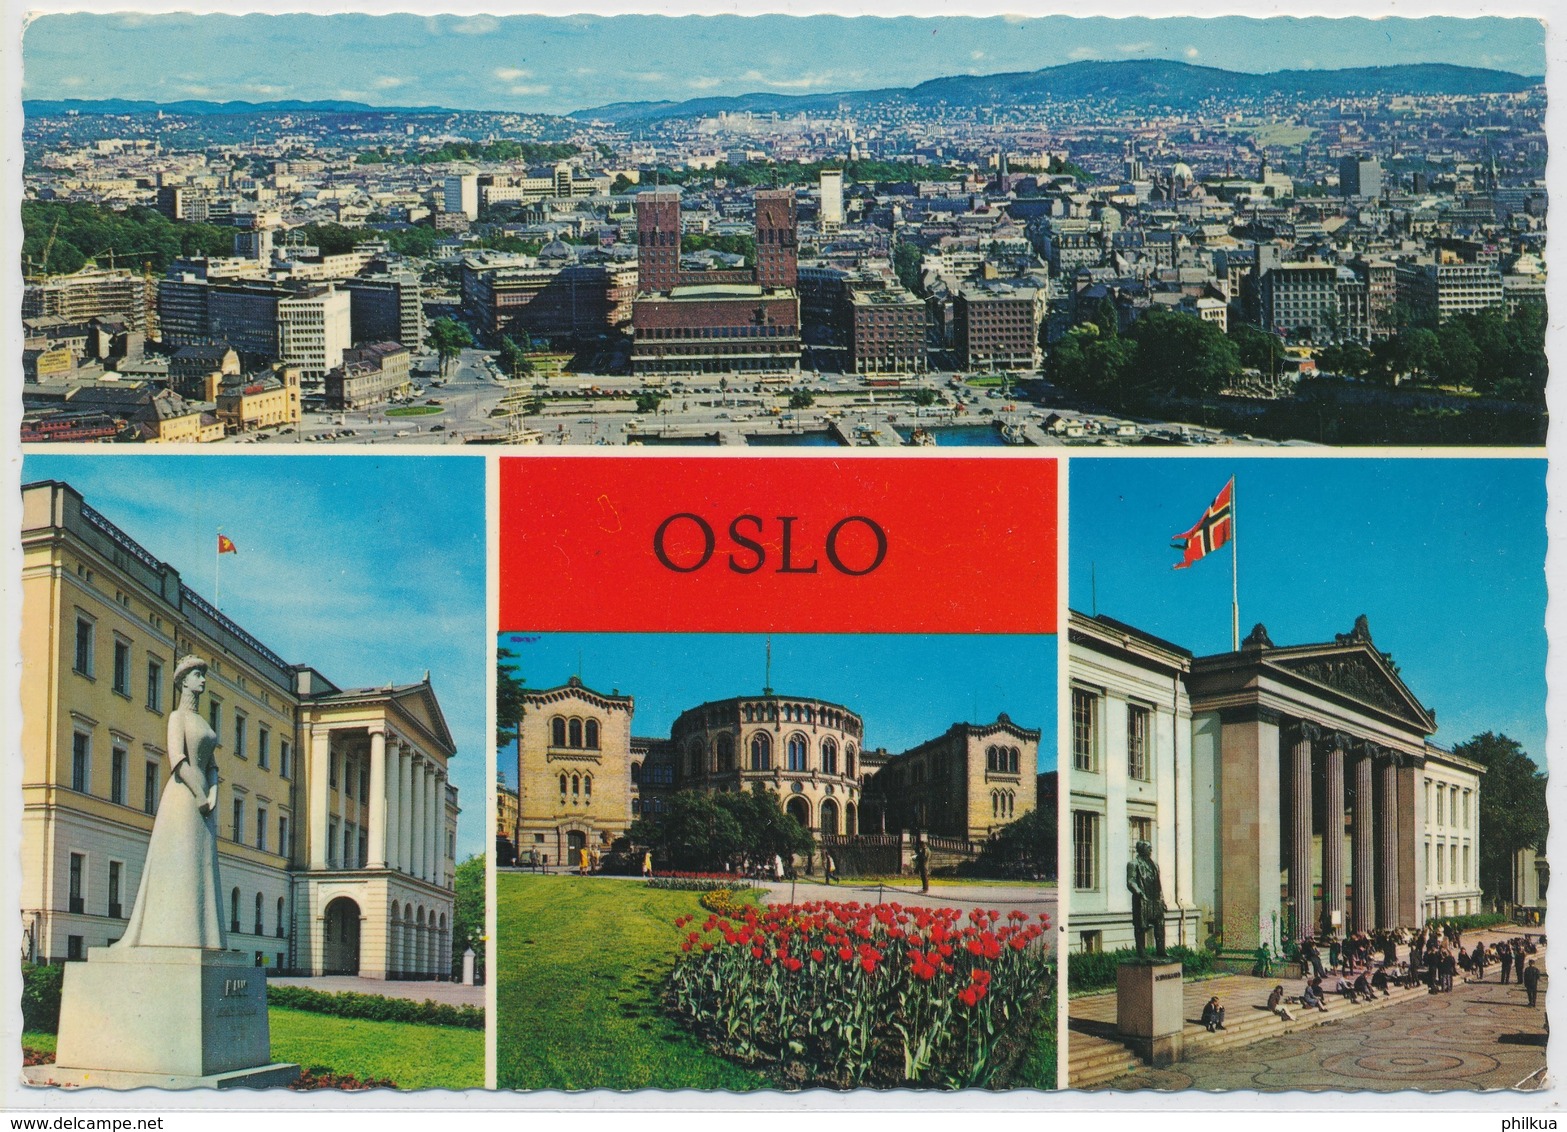 Oslo, Norway - The Town Hall - The Royal Palace - The Parliament Building -The University - Norway